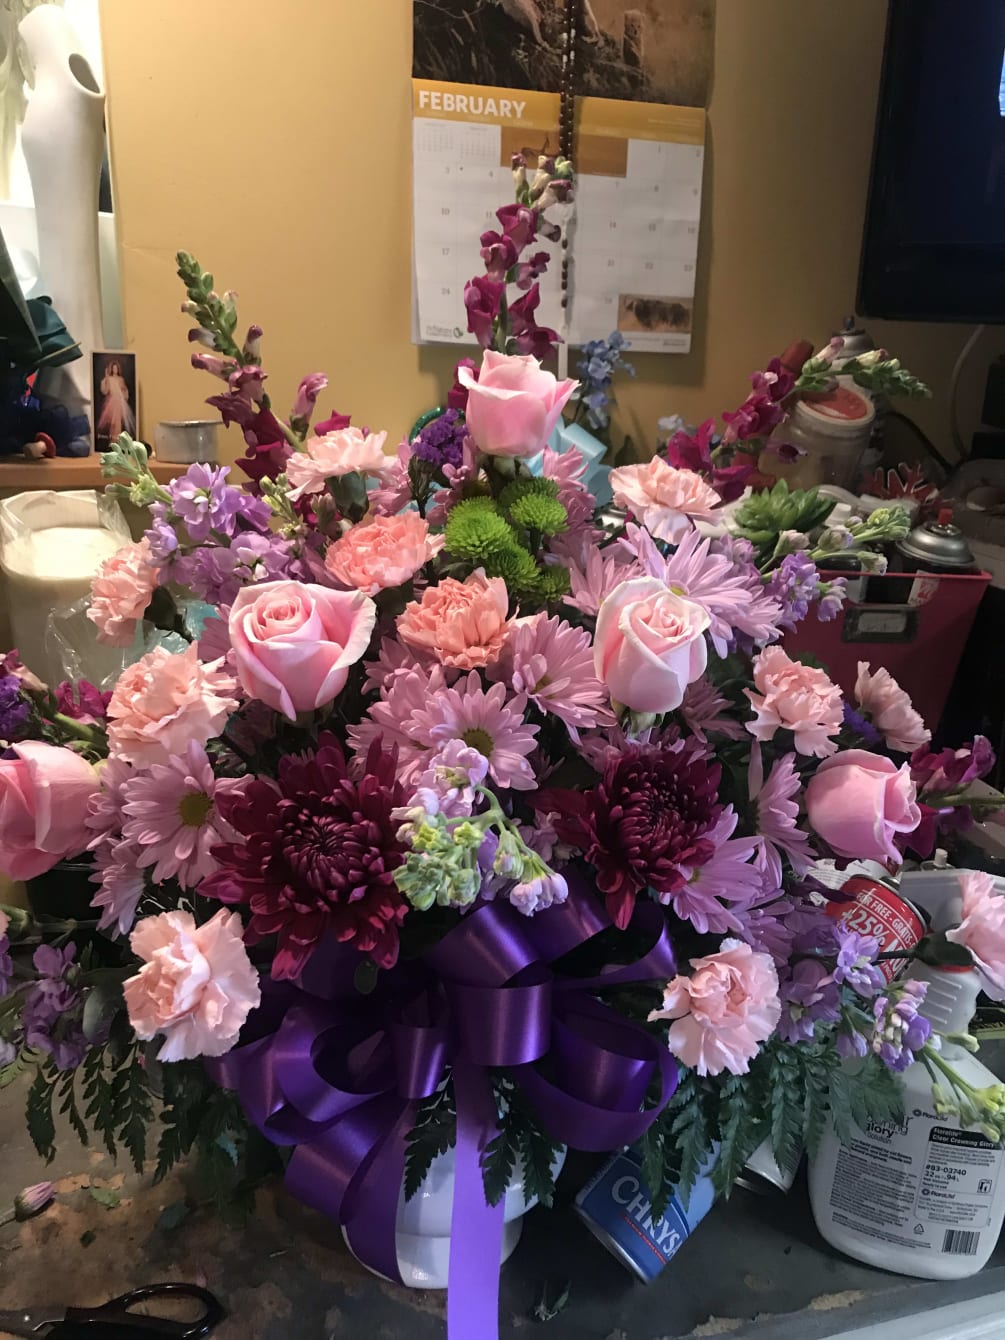 Representing care, compassion and love - pink blooms can offer solace in